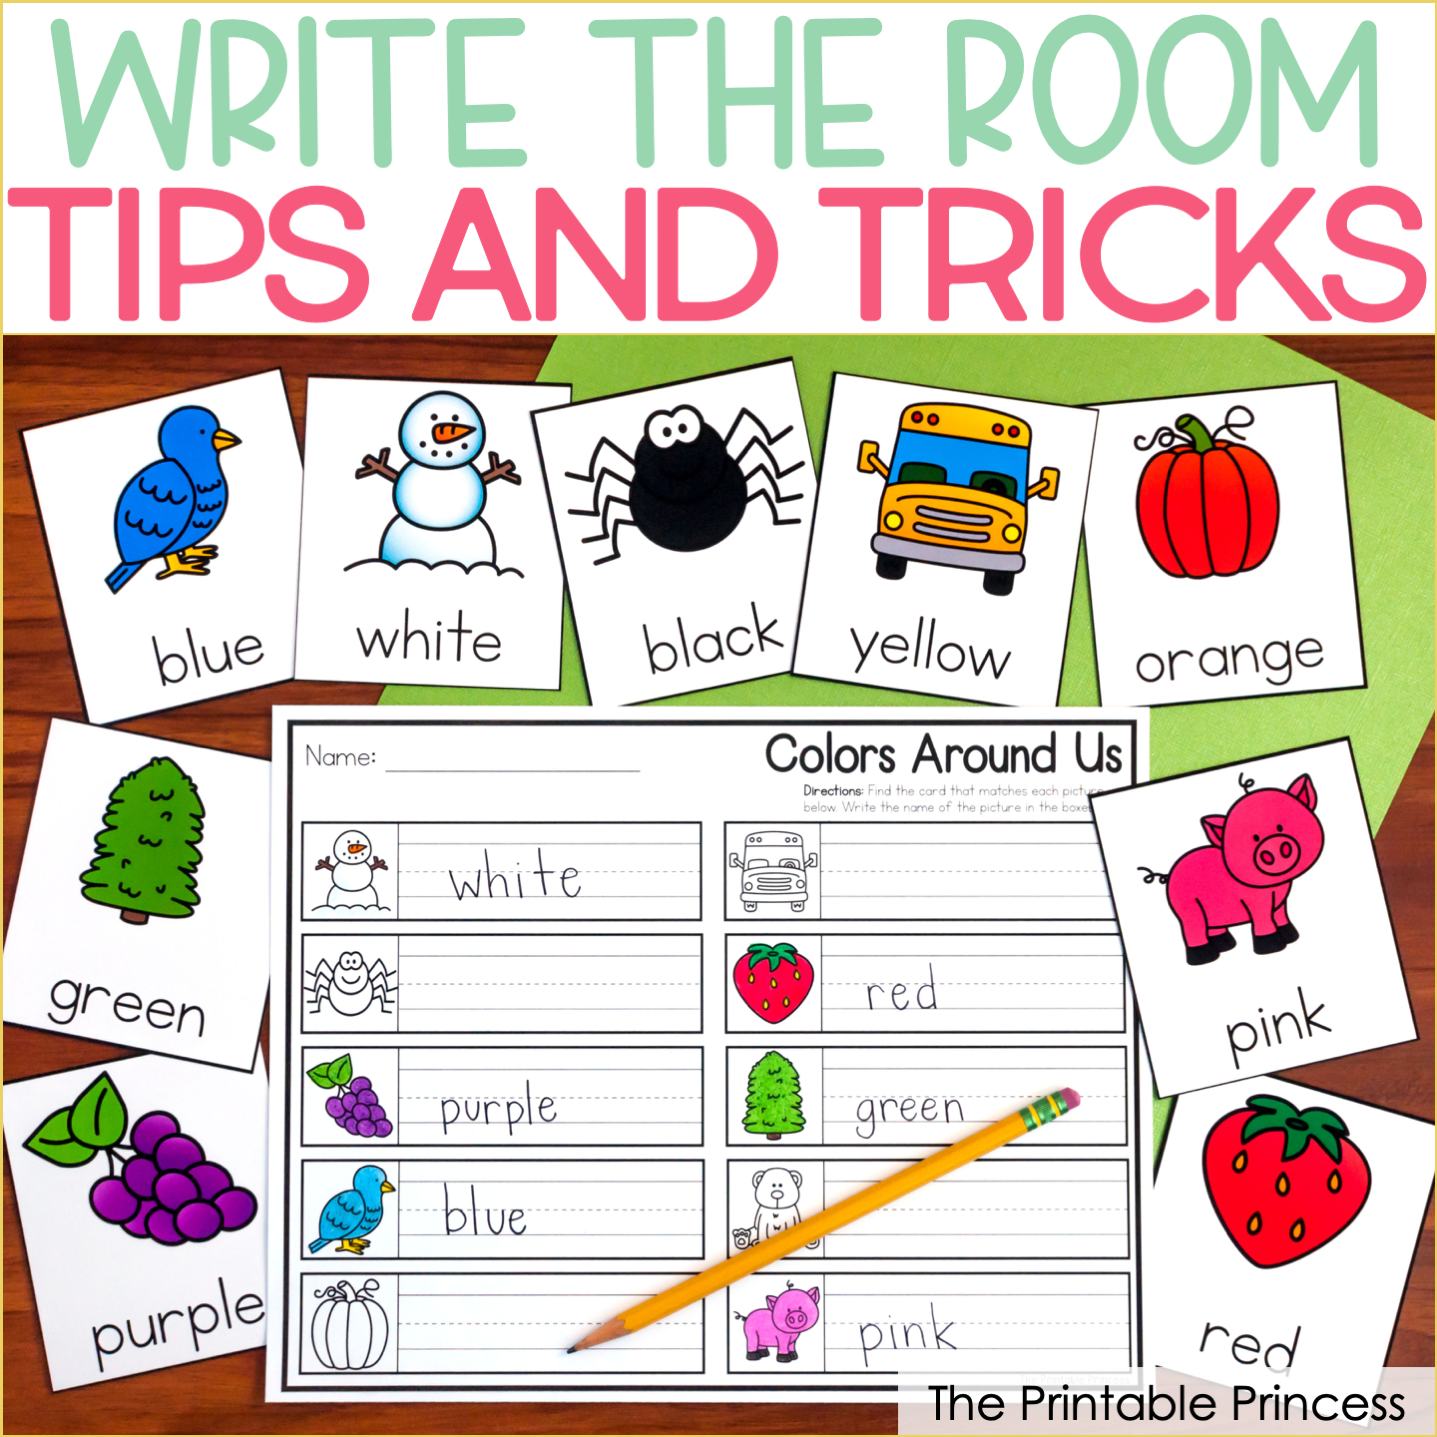 Write the Room Tips and Tricks